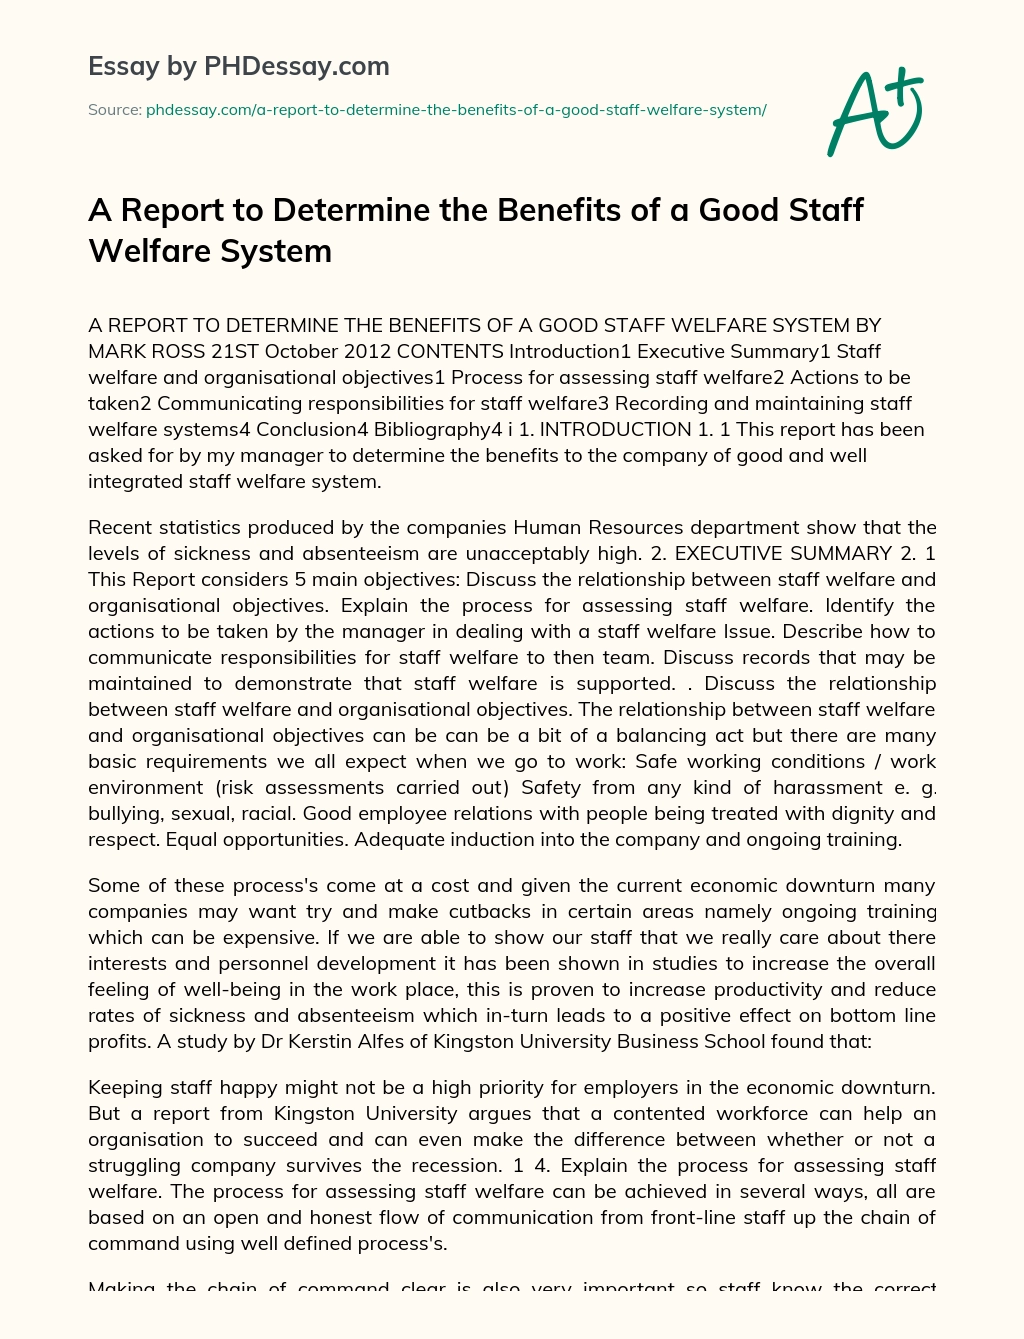 A Report to Determine the Benefits of a Good Staff Welfare System essay